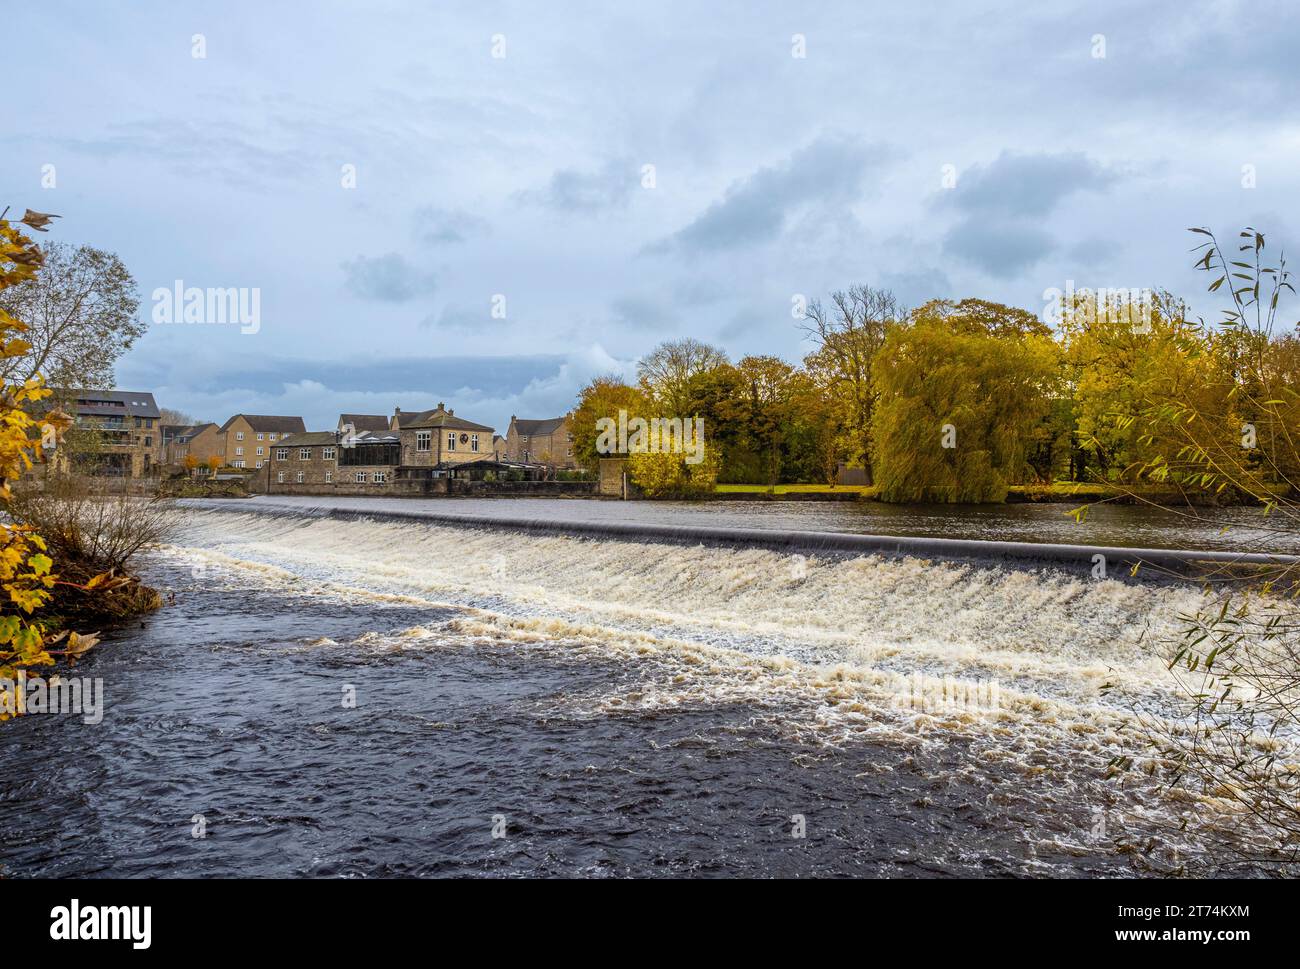 Weir on the River Wharfe in Otley, with Buon Apps restaurant in the distance, seen in Autumn. UK Stock Photo